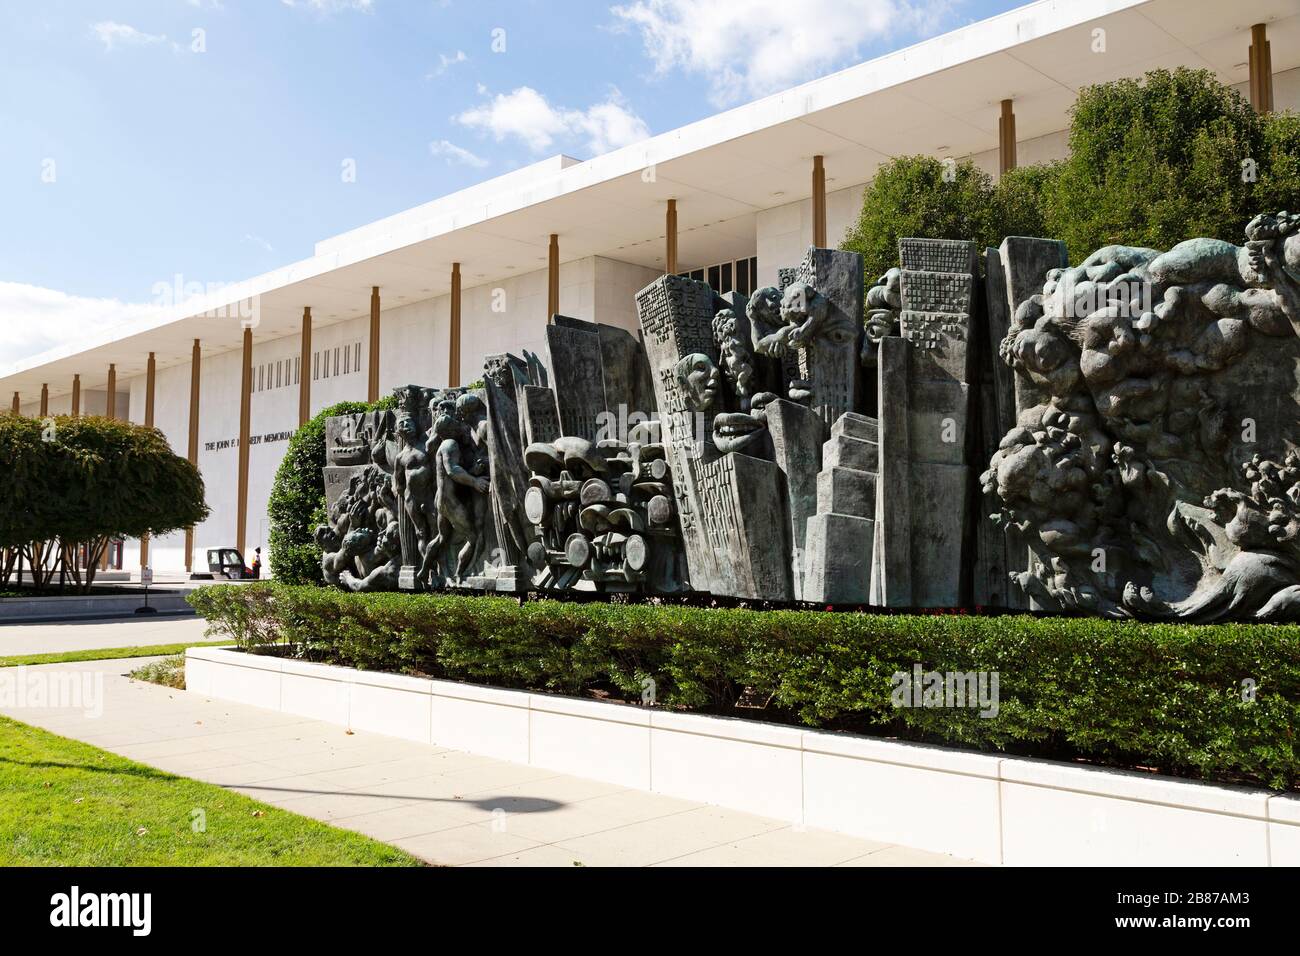 Exterior of the John F. Kennedy Center for the Performing Arts in